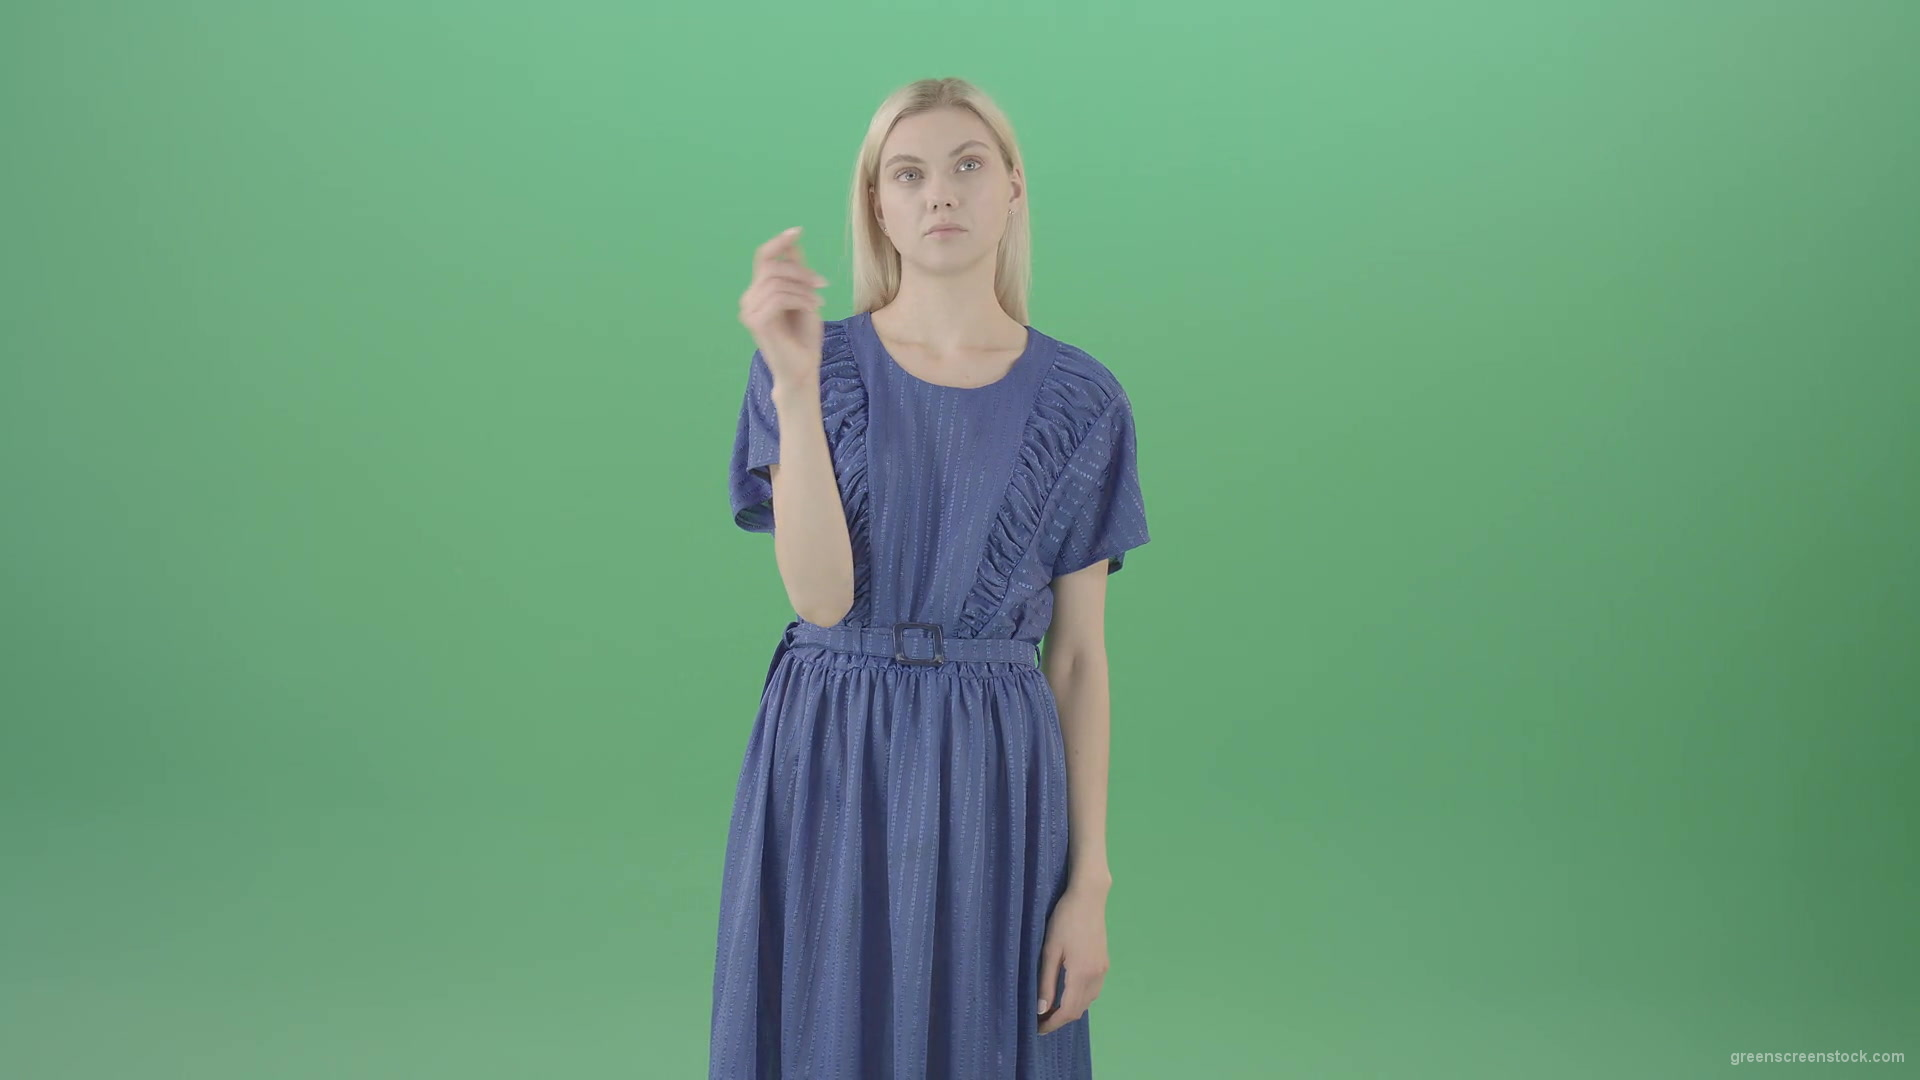 Boring-blonde-girl-in-blue-costume-can-not-find-virtual-products-on-touch-screen-isolated-on-green-background-4K-Video-Footage--1920_002 Green Screen Stock